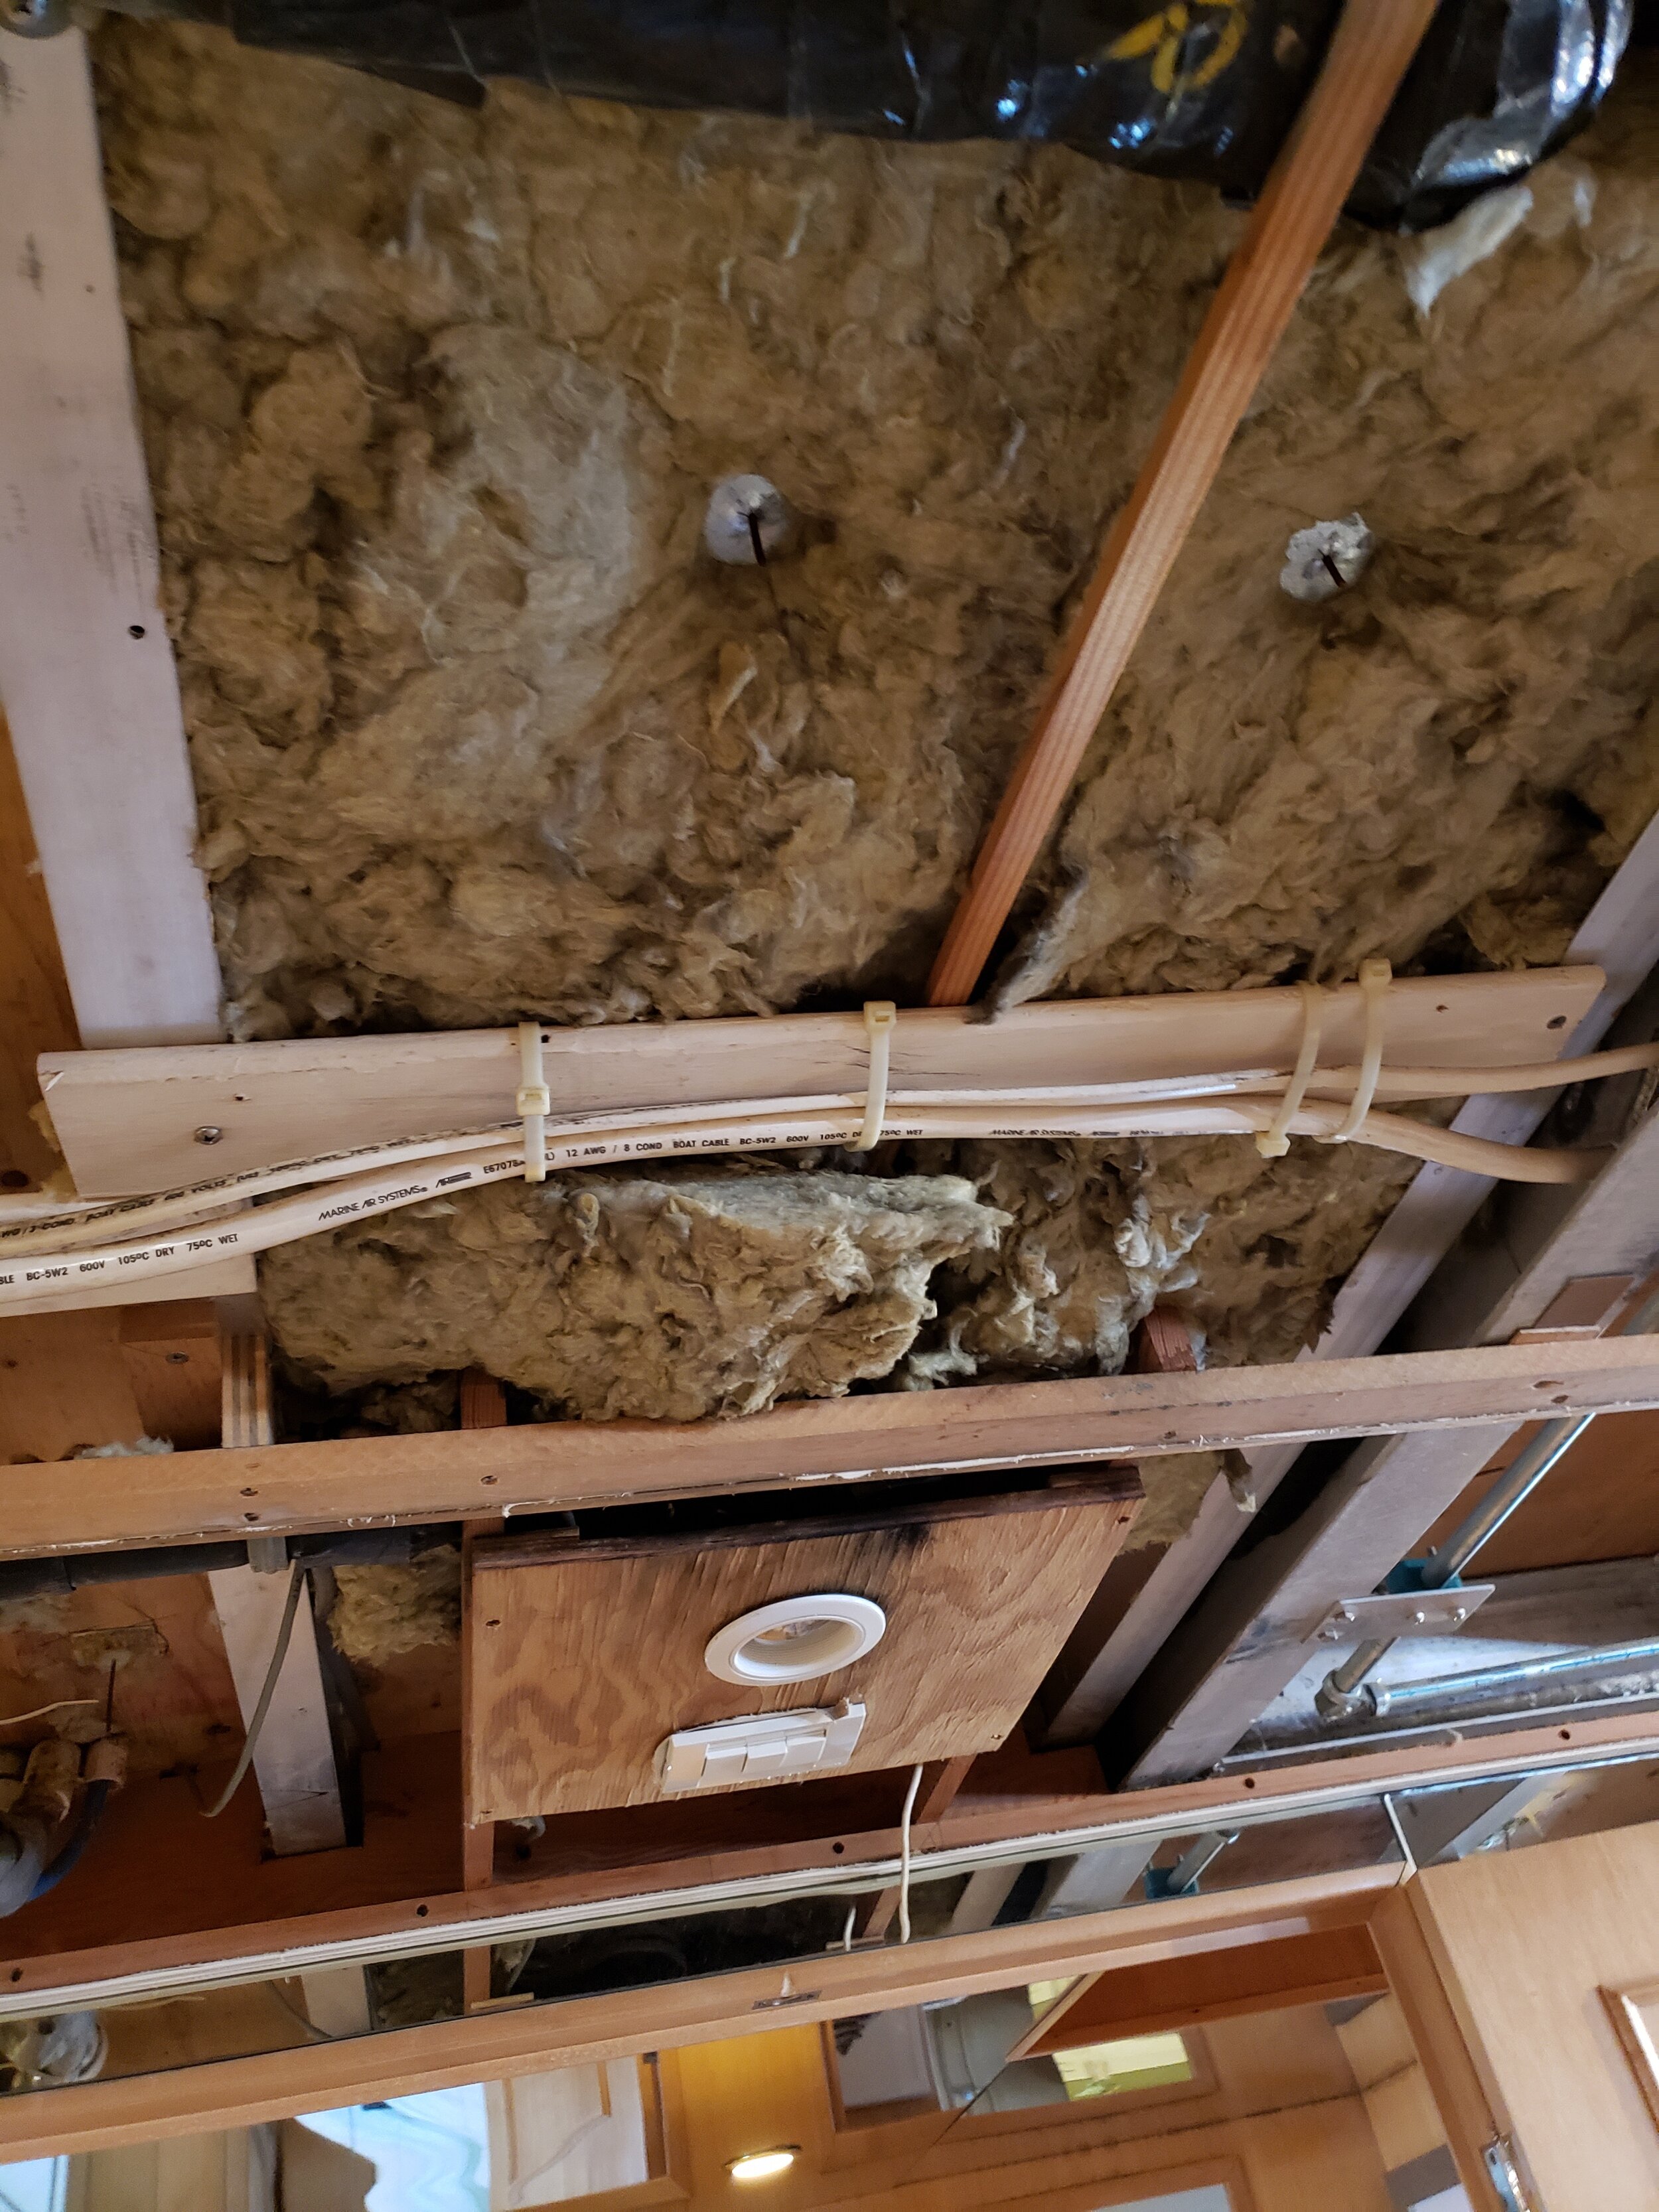  Old Worn Rockwool Used As Thermal Insulation In The Main Salon Overhead 